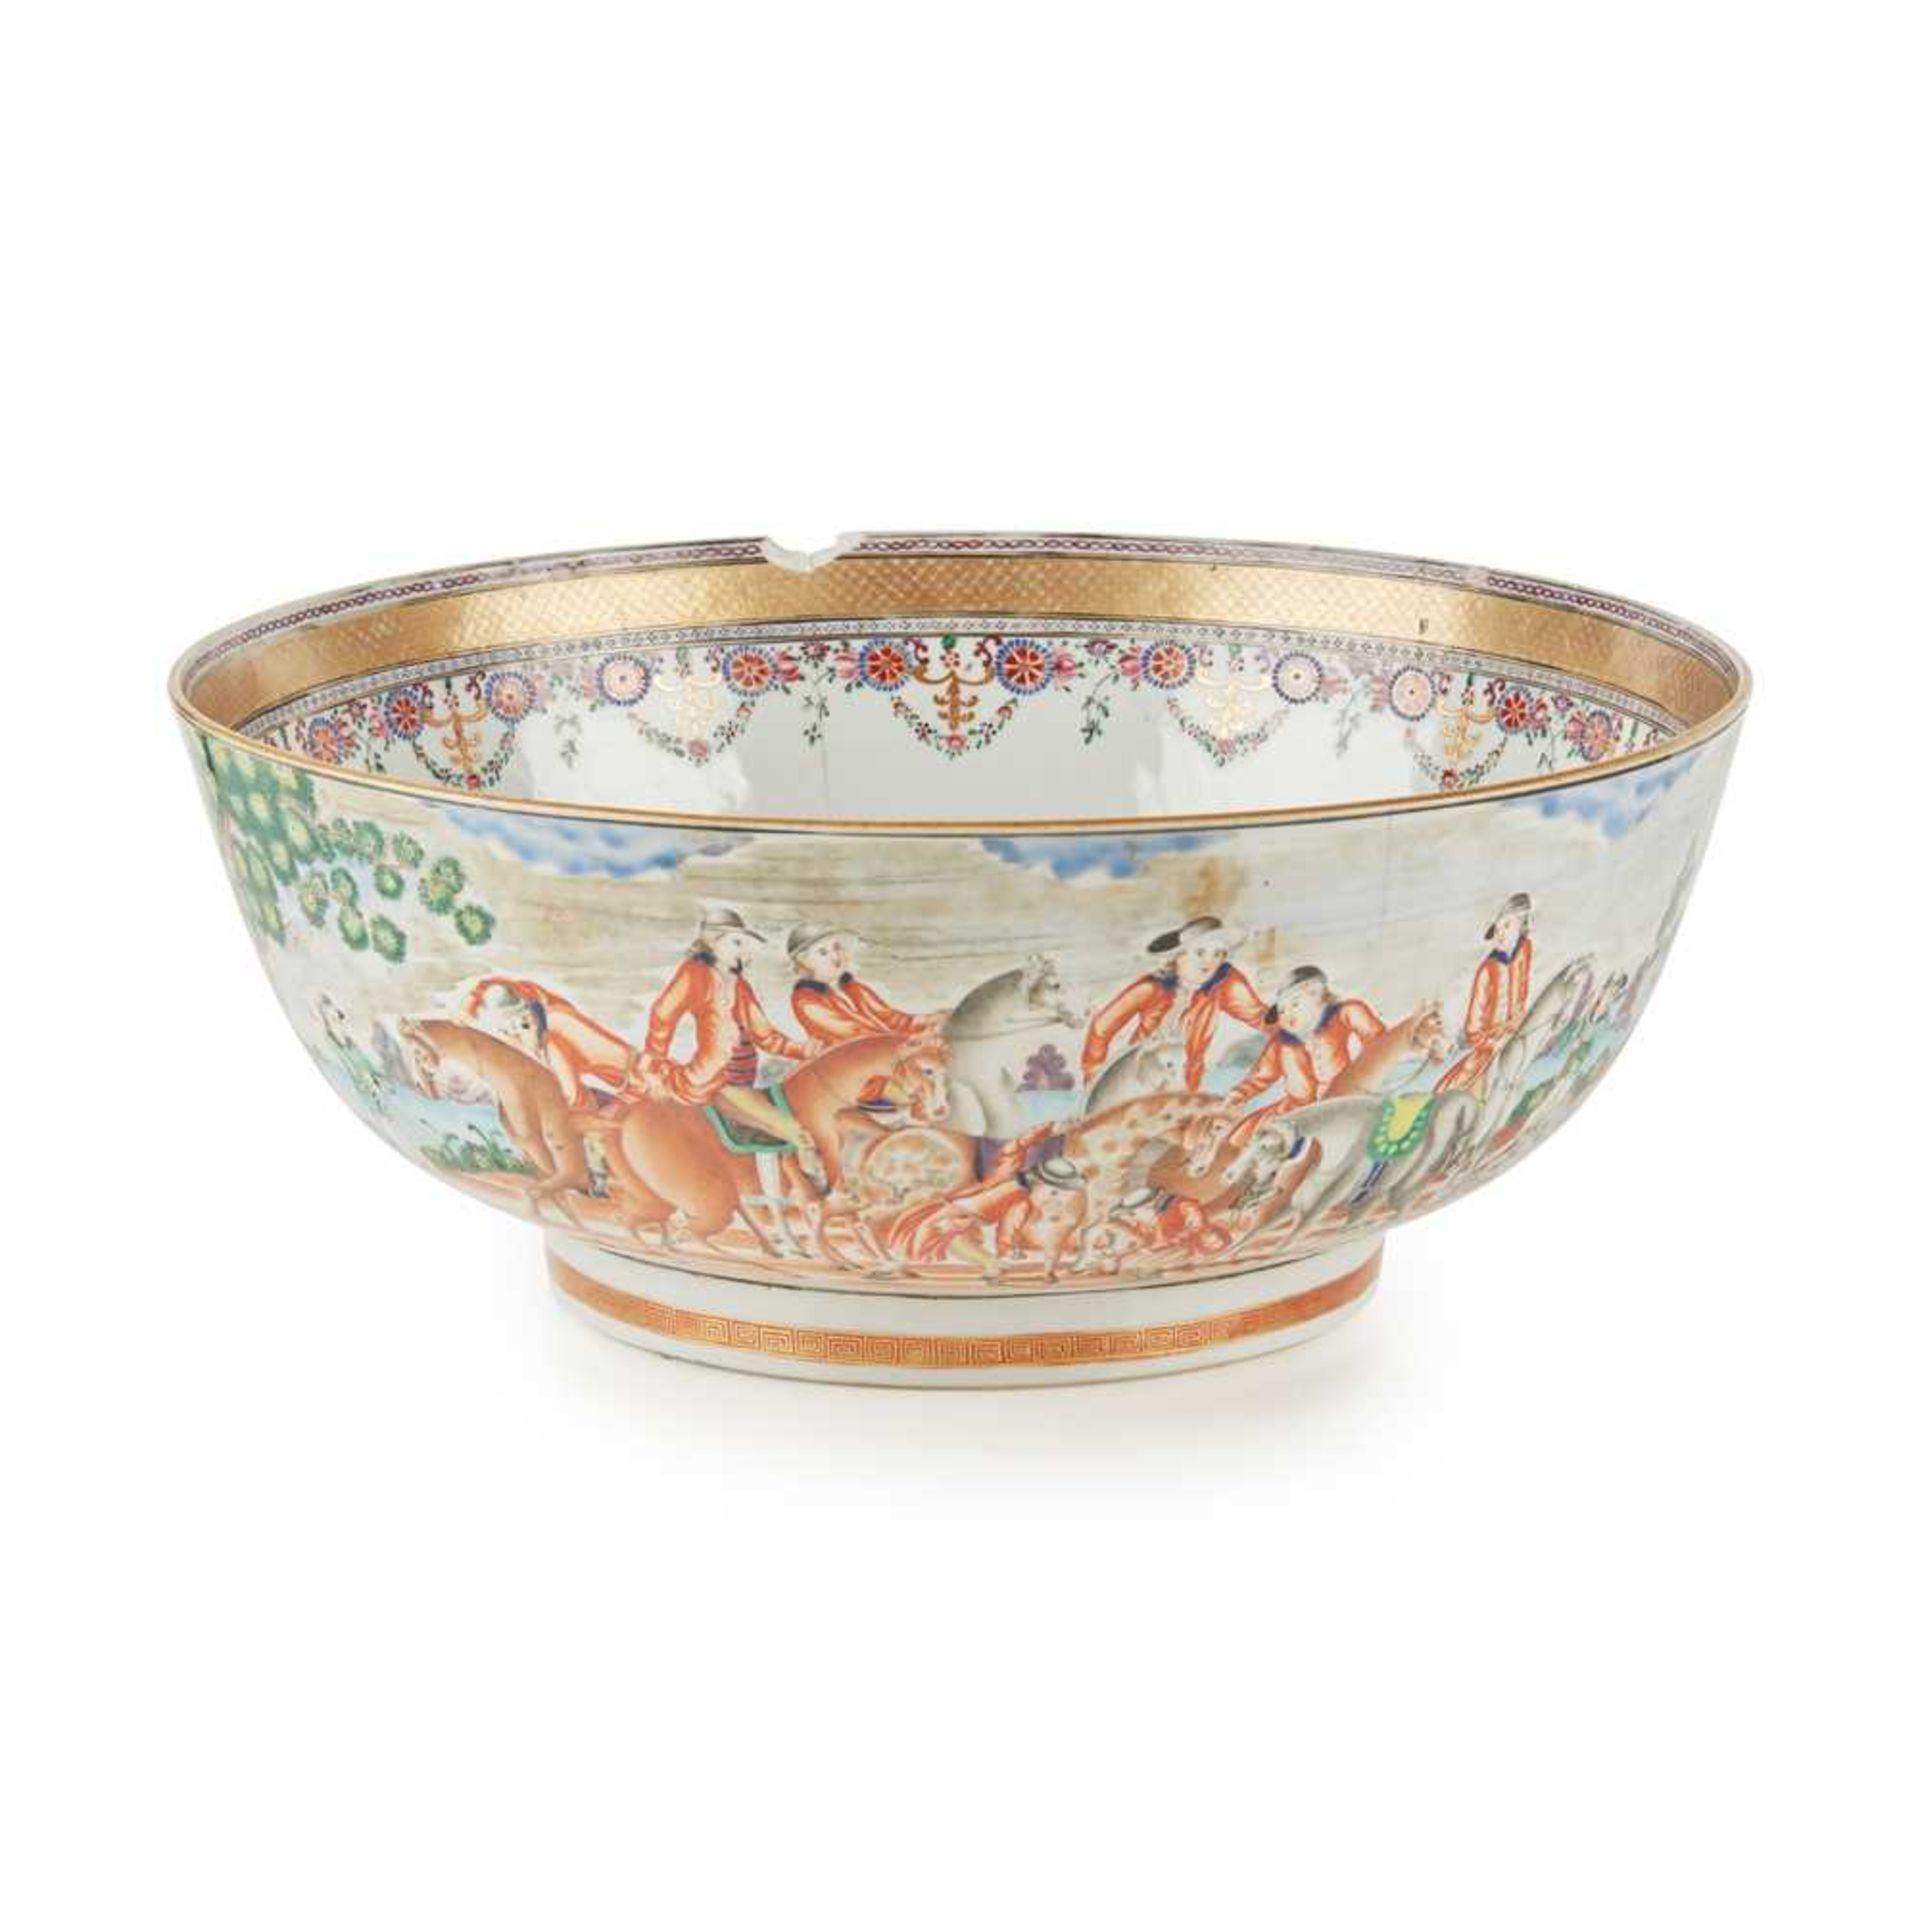 A CHINESE EXPORT EUROPEAN SUBJECT PORCELAIN PUNCH BOWL QING DYNASTY, 18TH CENTURY